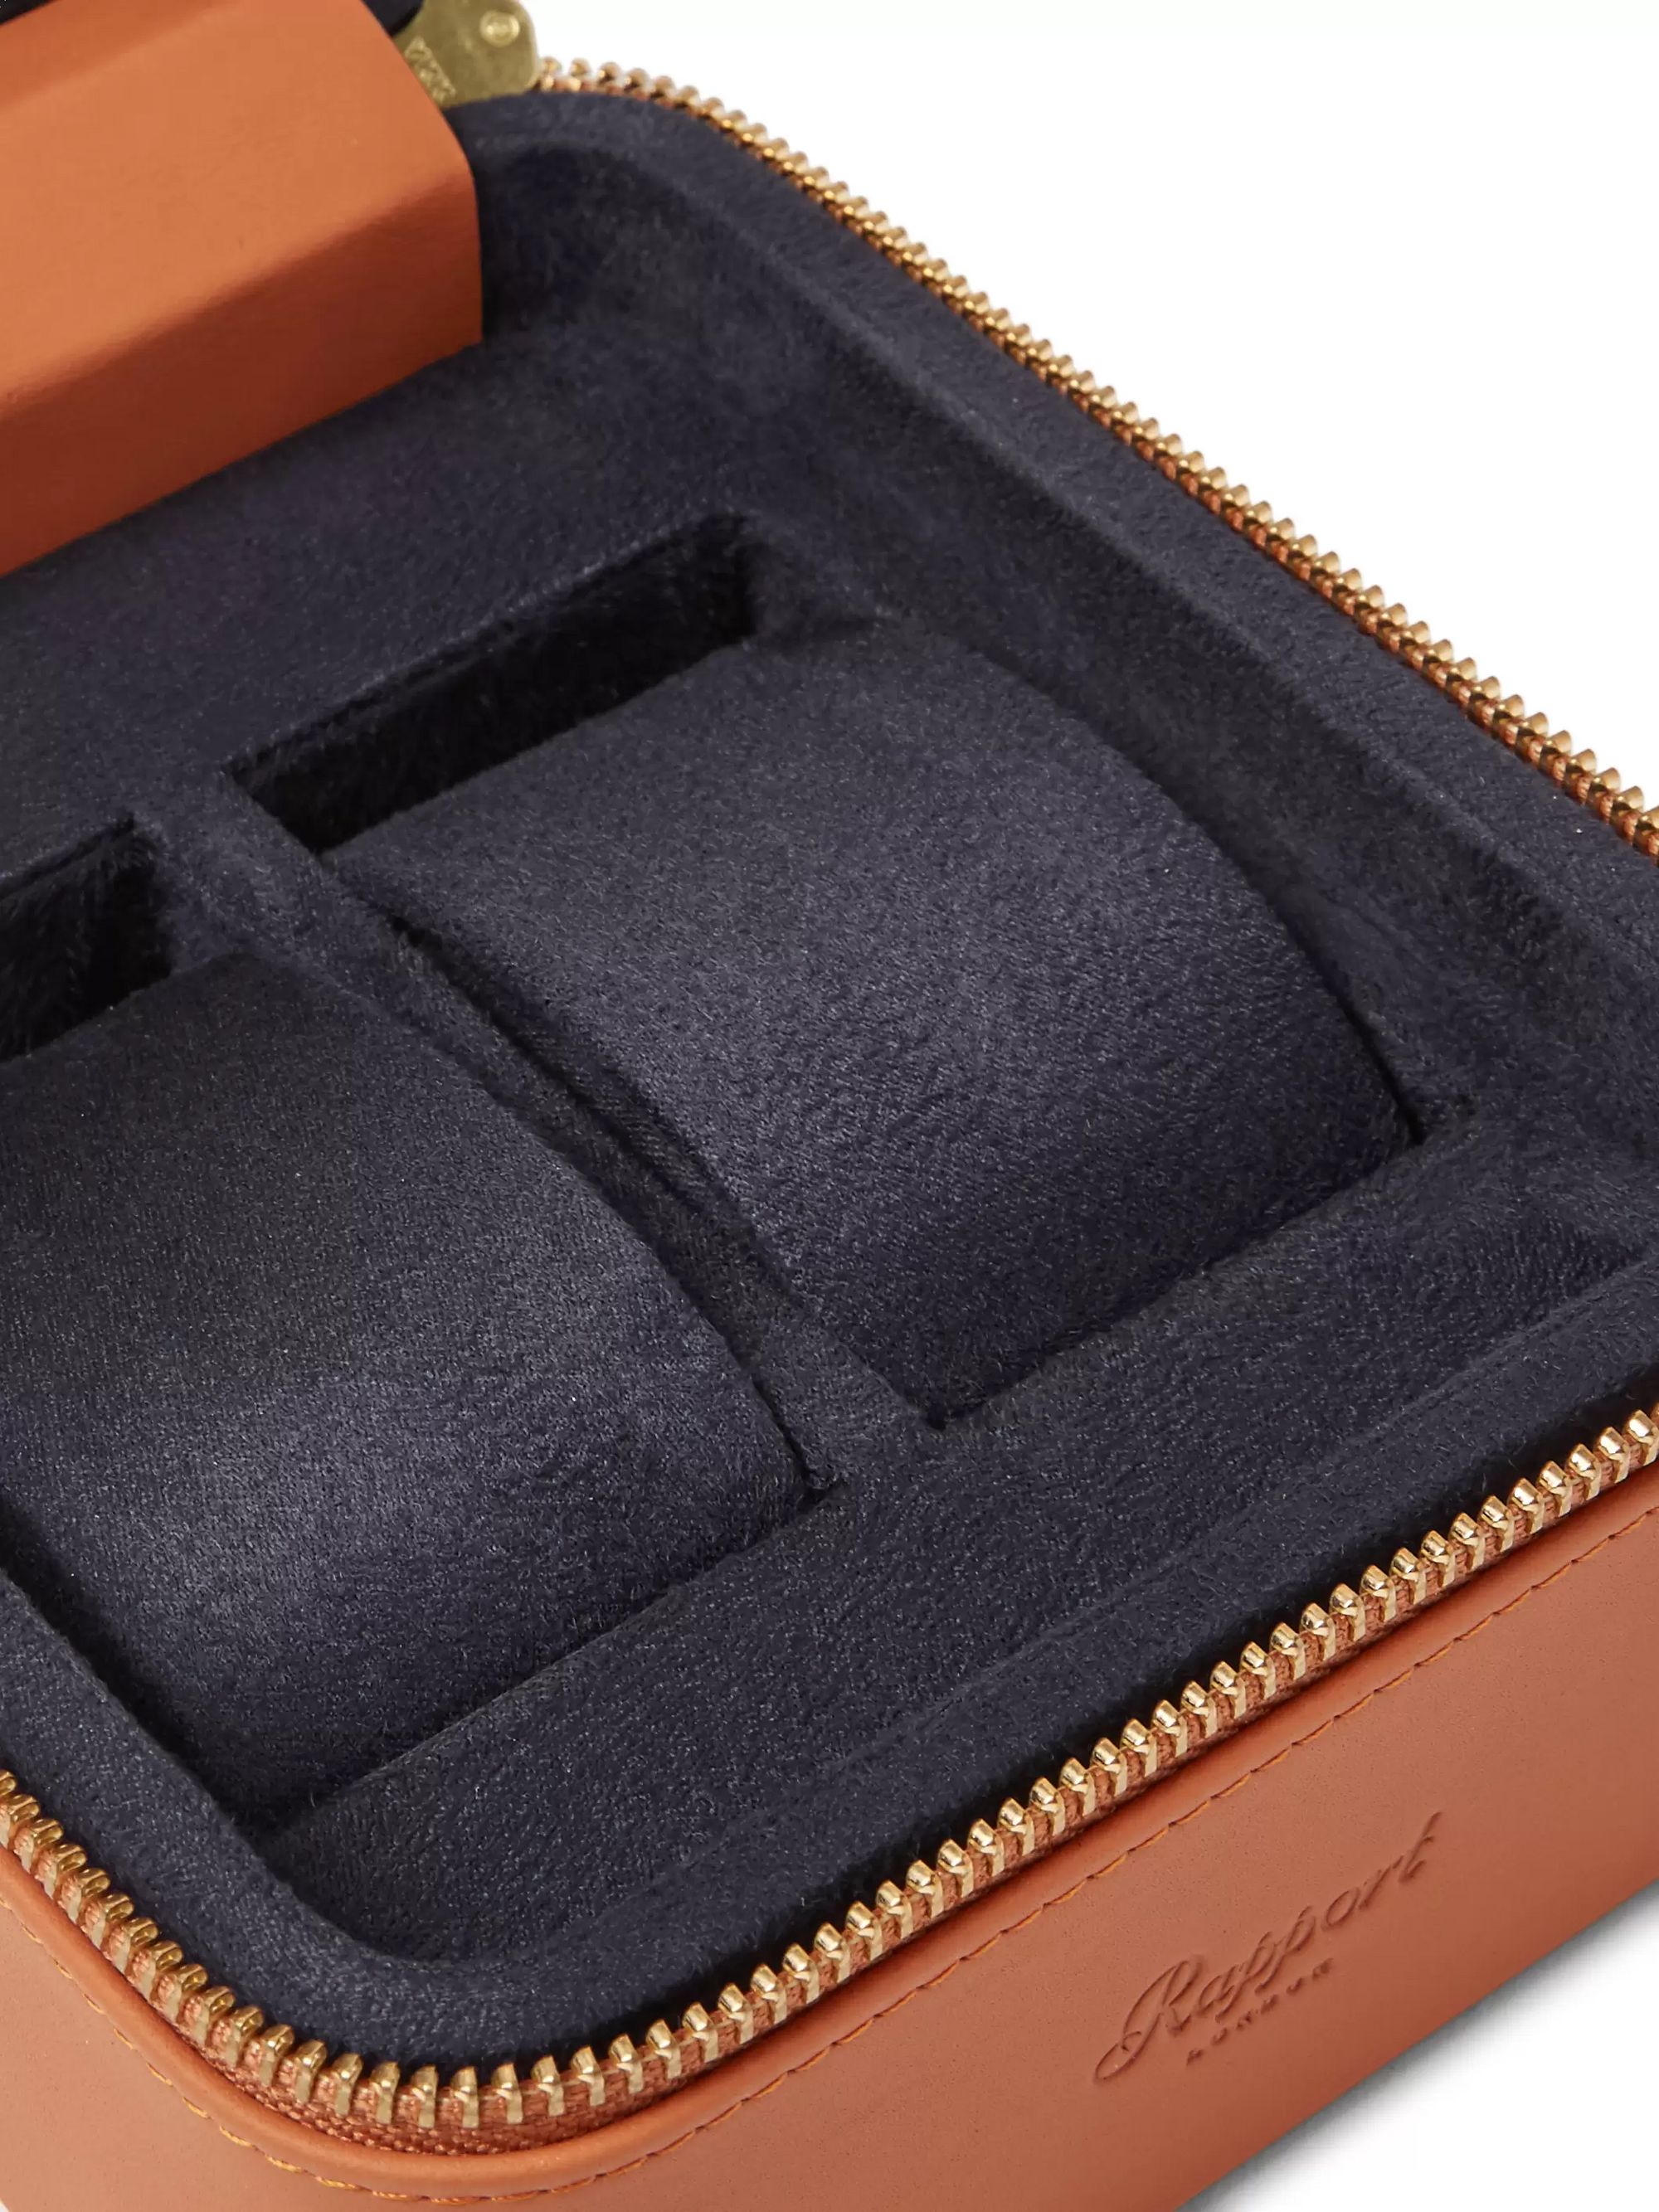 RAPPORT LONDON Hyde Park Zip-Around Leather Watch Box